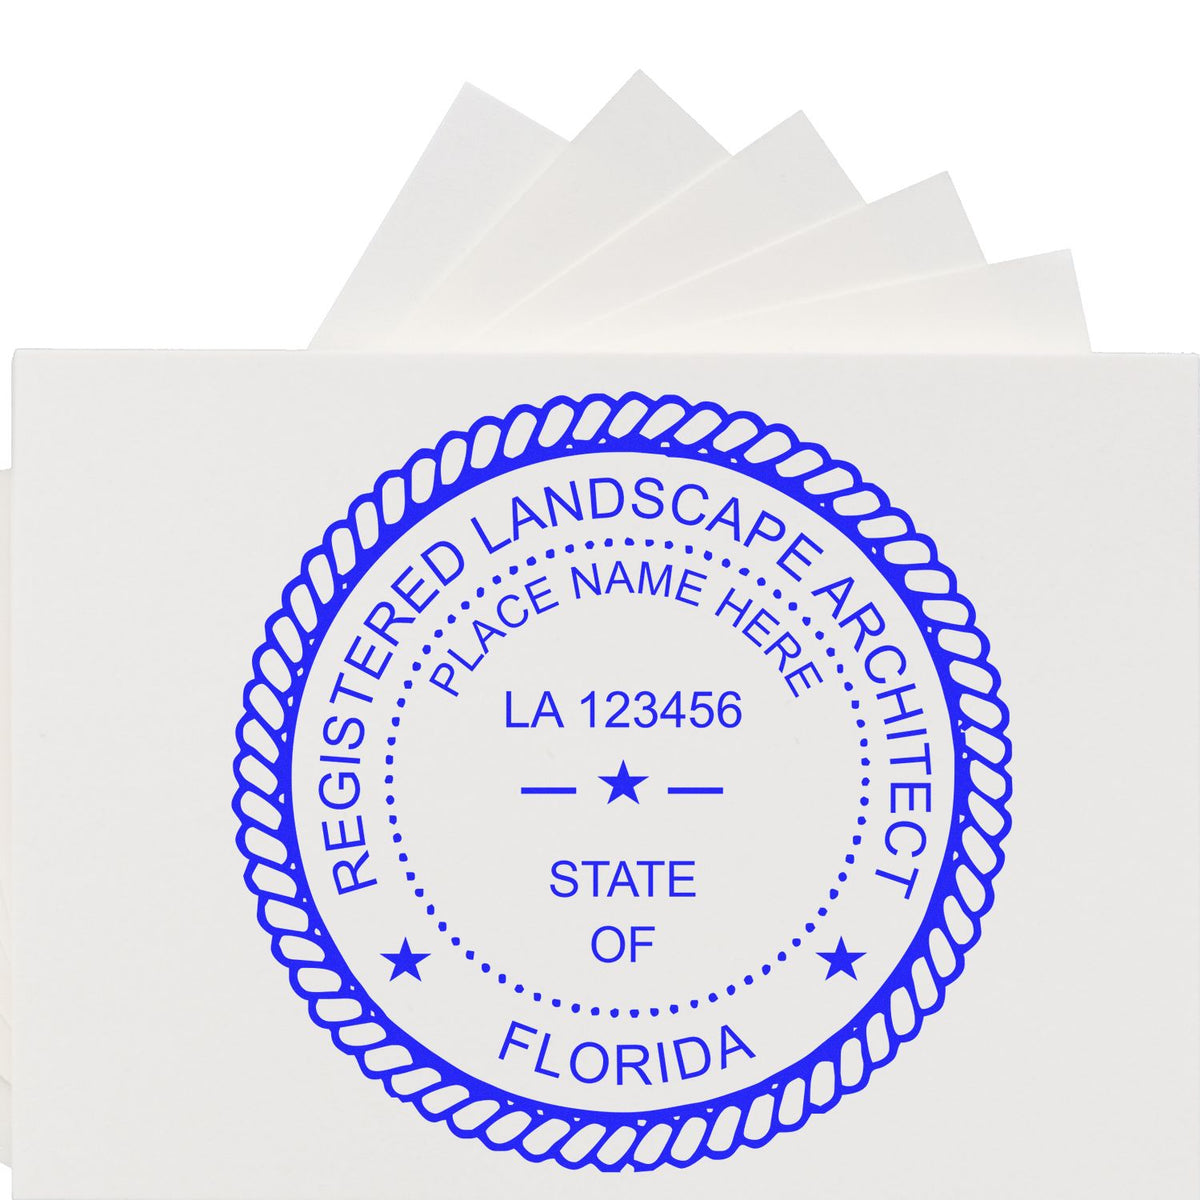 This paper is stamped with a sample imprint of the Self-Inking Florida Landscape Architect Stamp, signifying its quality and reliability.